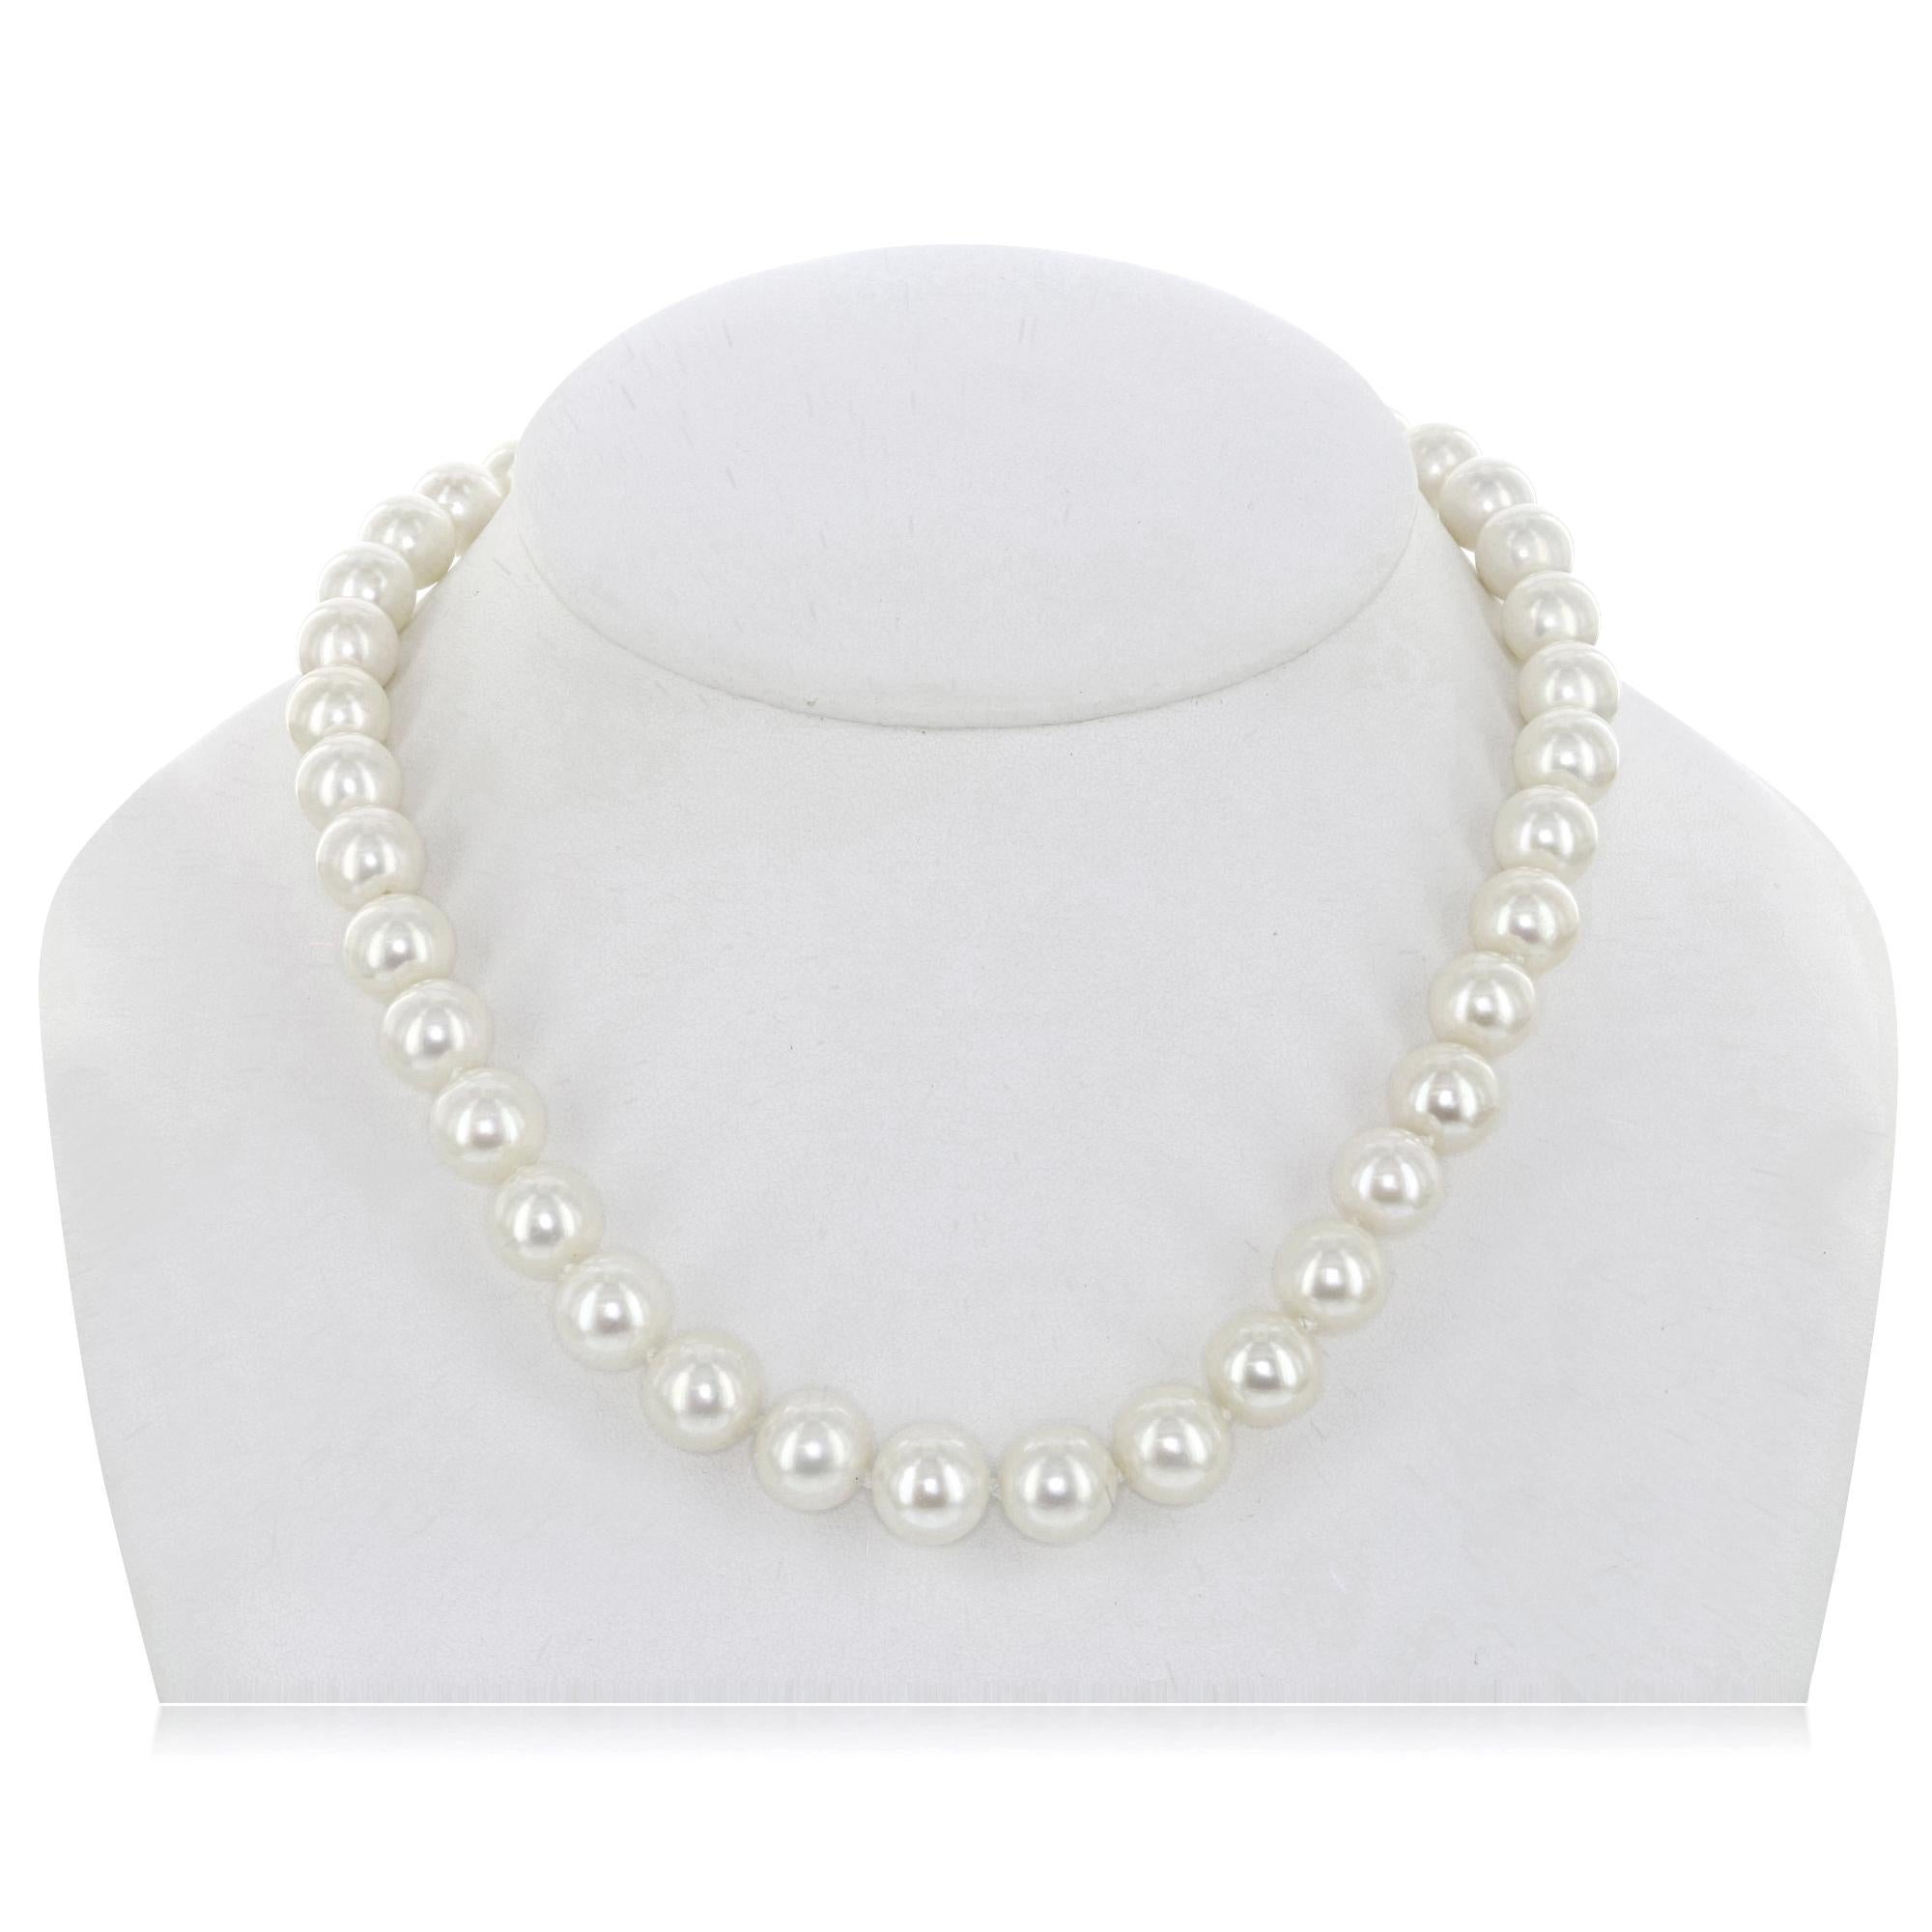 This Chinese freshwater cultured pearl necklace features round pearls measuring 9.4x10.4mm. The necklace is strung to 18 inches in length and finished with a silver color metal clasp.